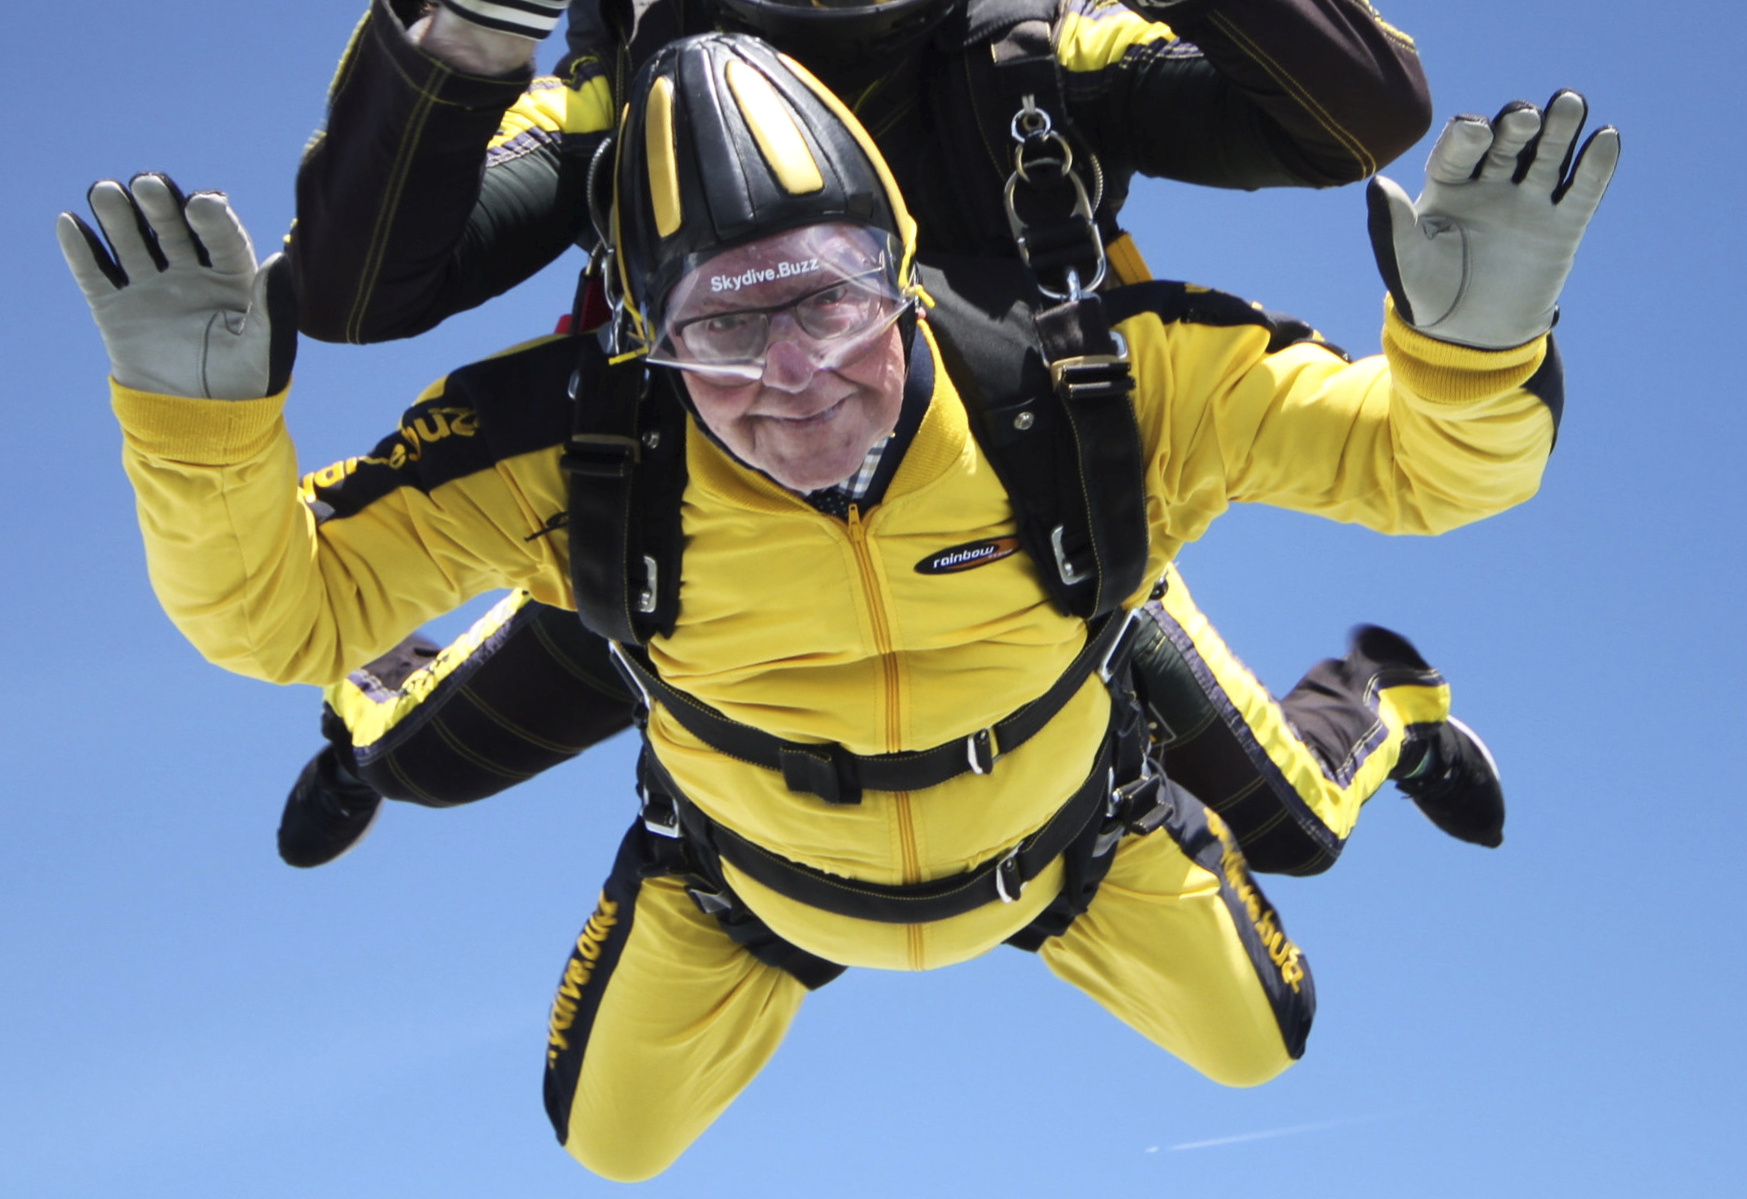 101-Year-Old D-Day Veteran Becomes World's Oldest Skydiver